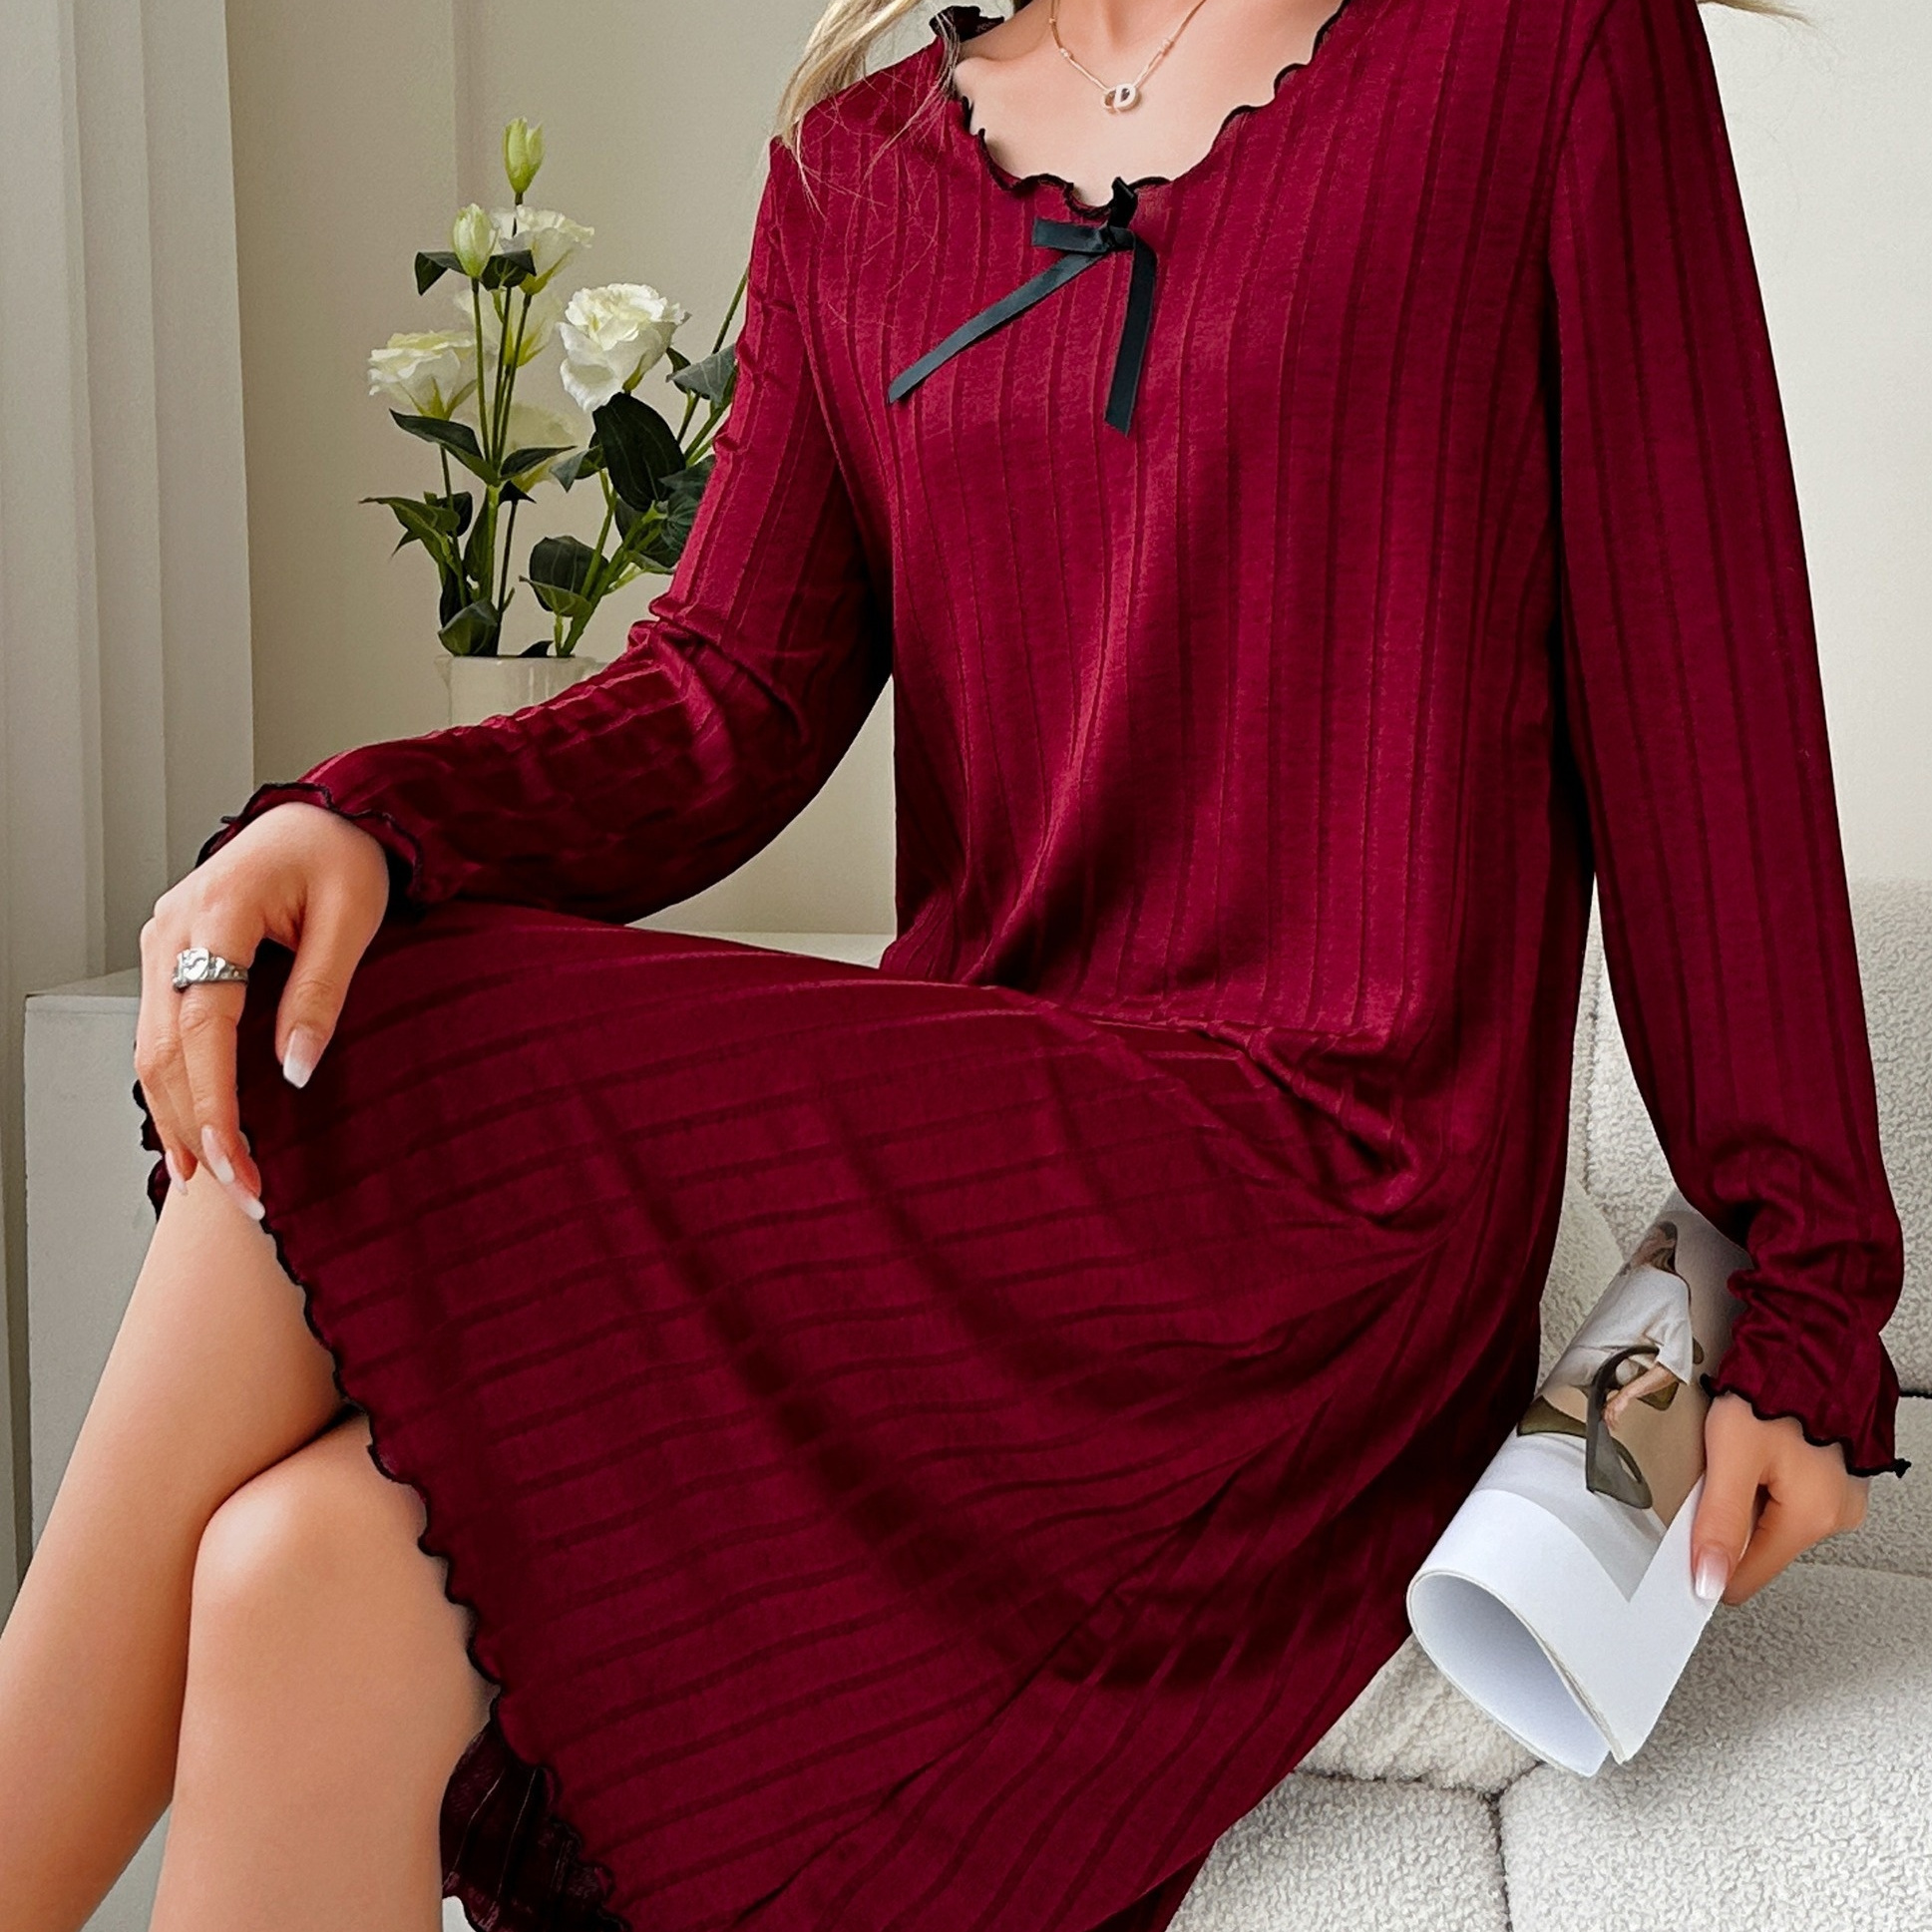 

Solid Ribbed Frill Trim Nightgown, Casual Long Sleeve Bow Decor Round Neck Midi Dress, Women's Sleepwear For Fall/ Winter